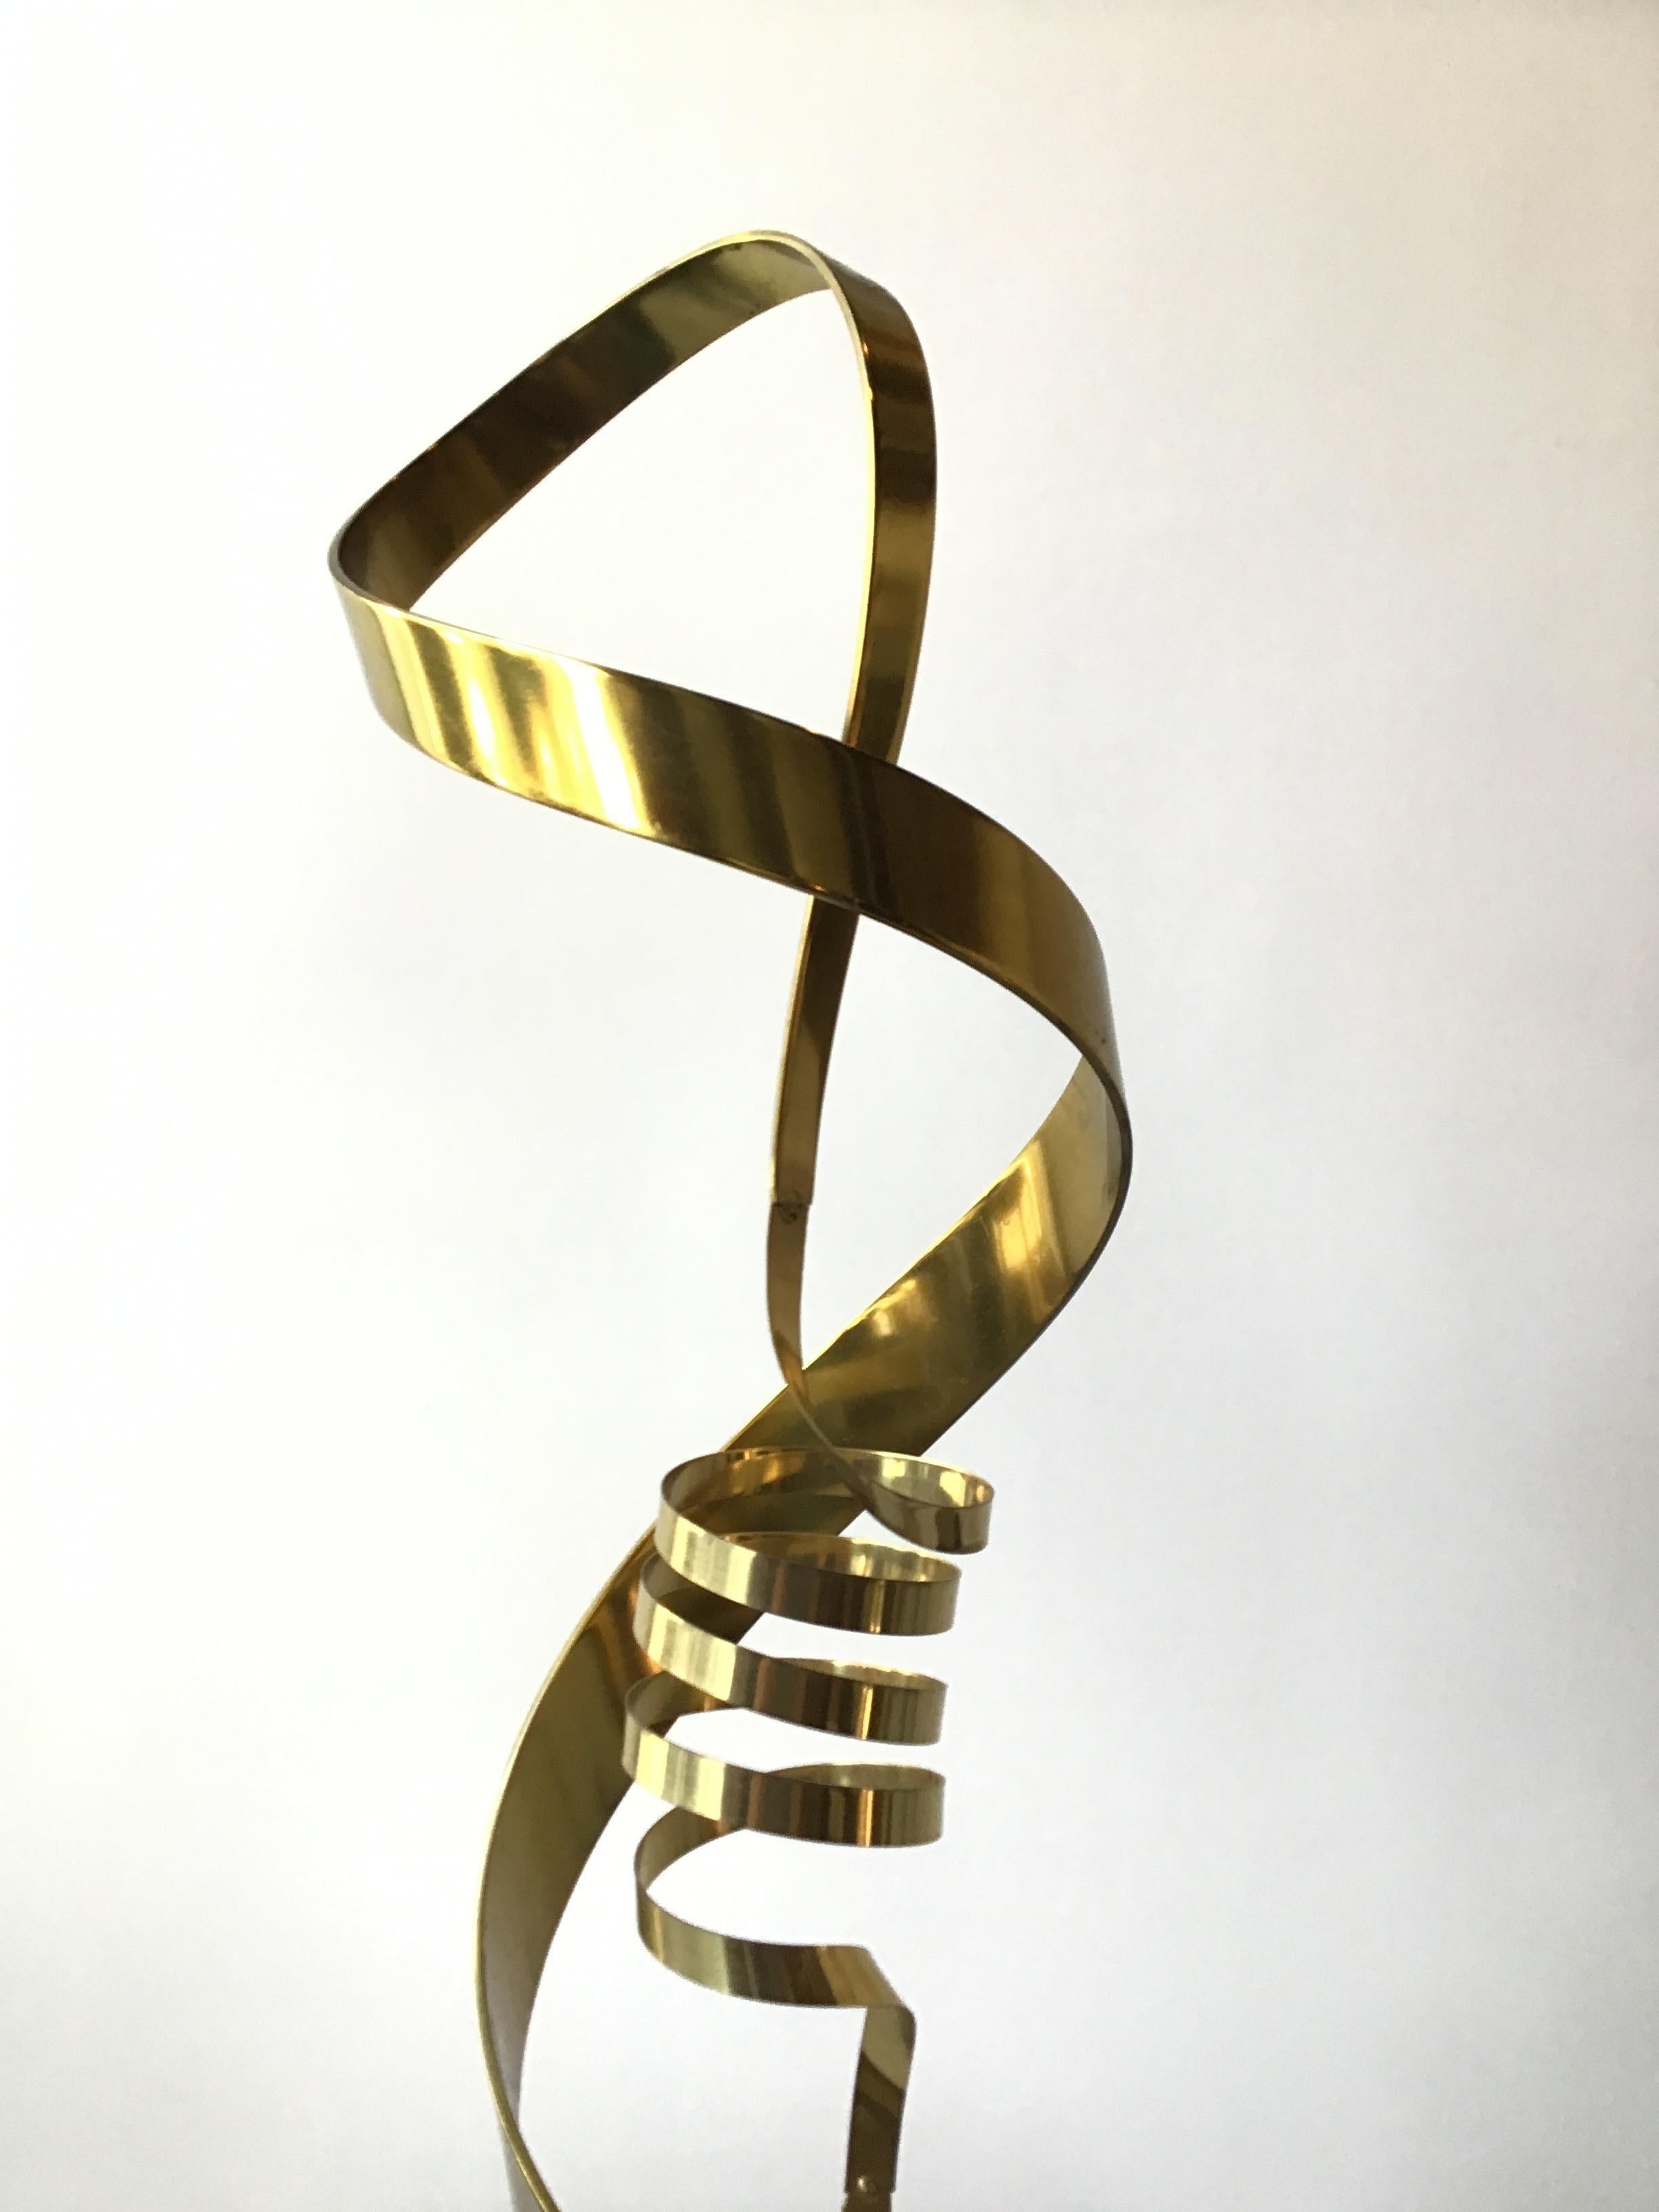 1980s brass ribbon abstract sculpture on marble base
Brass sculpture can turn on base.